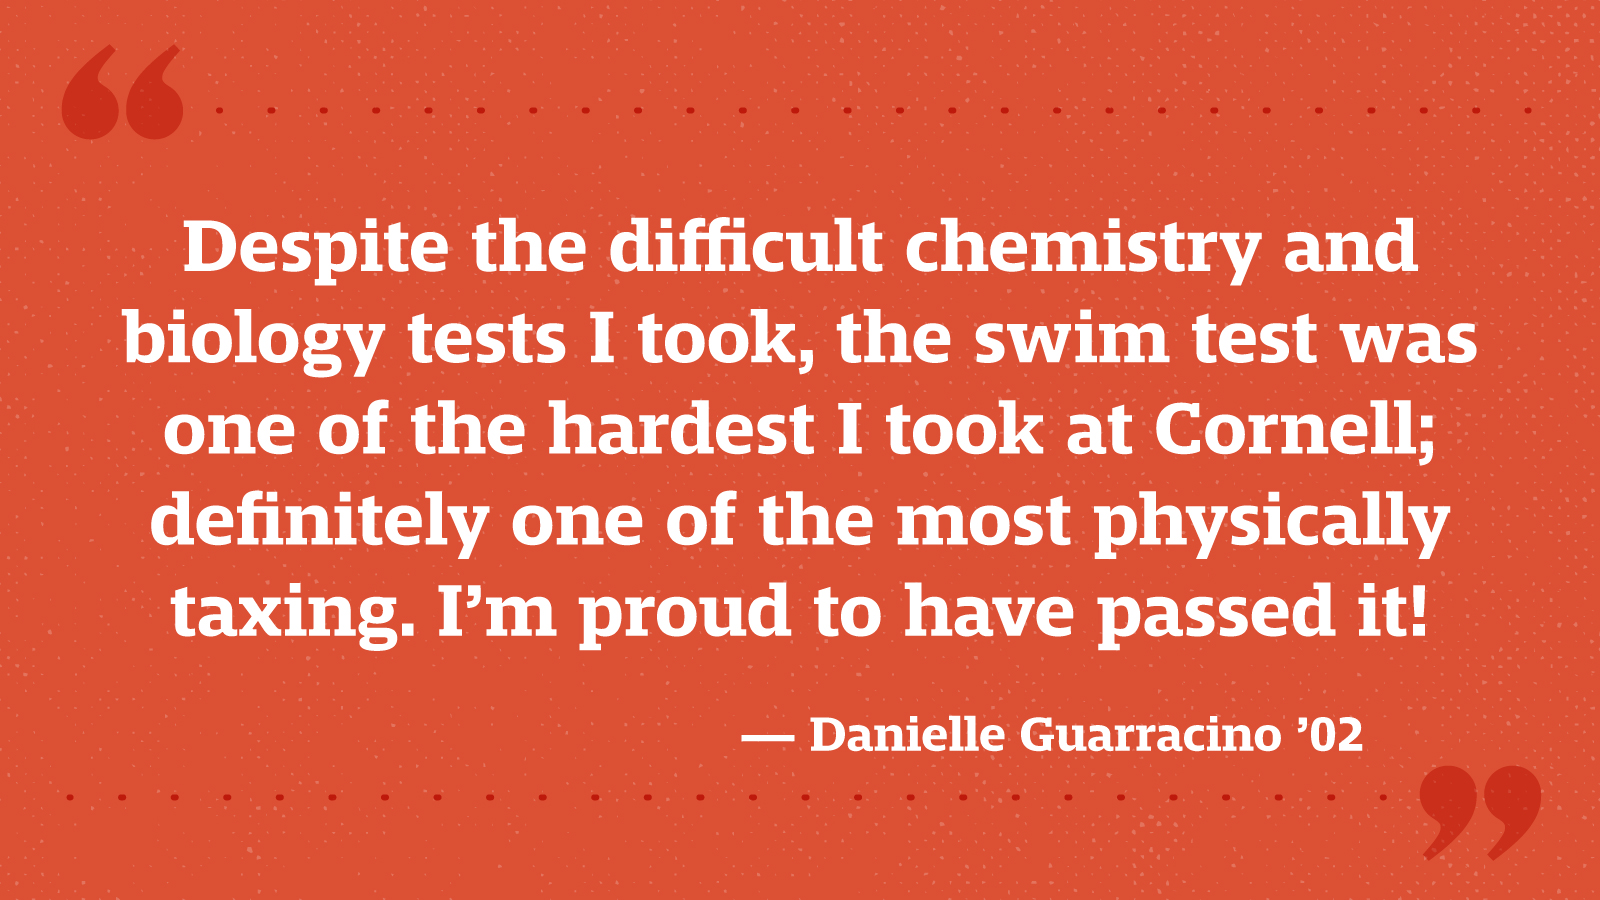 Despite the difficult chemistry and biology tests I took, the swim test was one of the hardest I took at Cornell; definitely one of the most physically taxing. I’m proud to have passed it! — Danielle Guarracino ’02